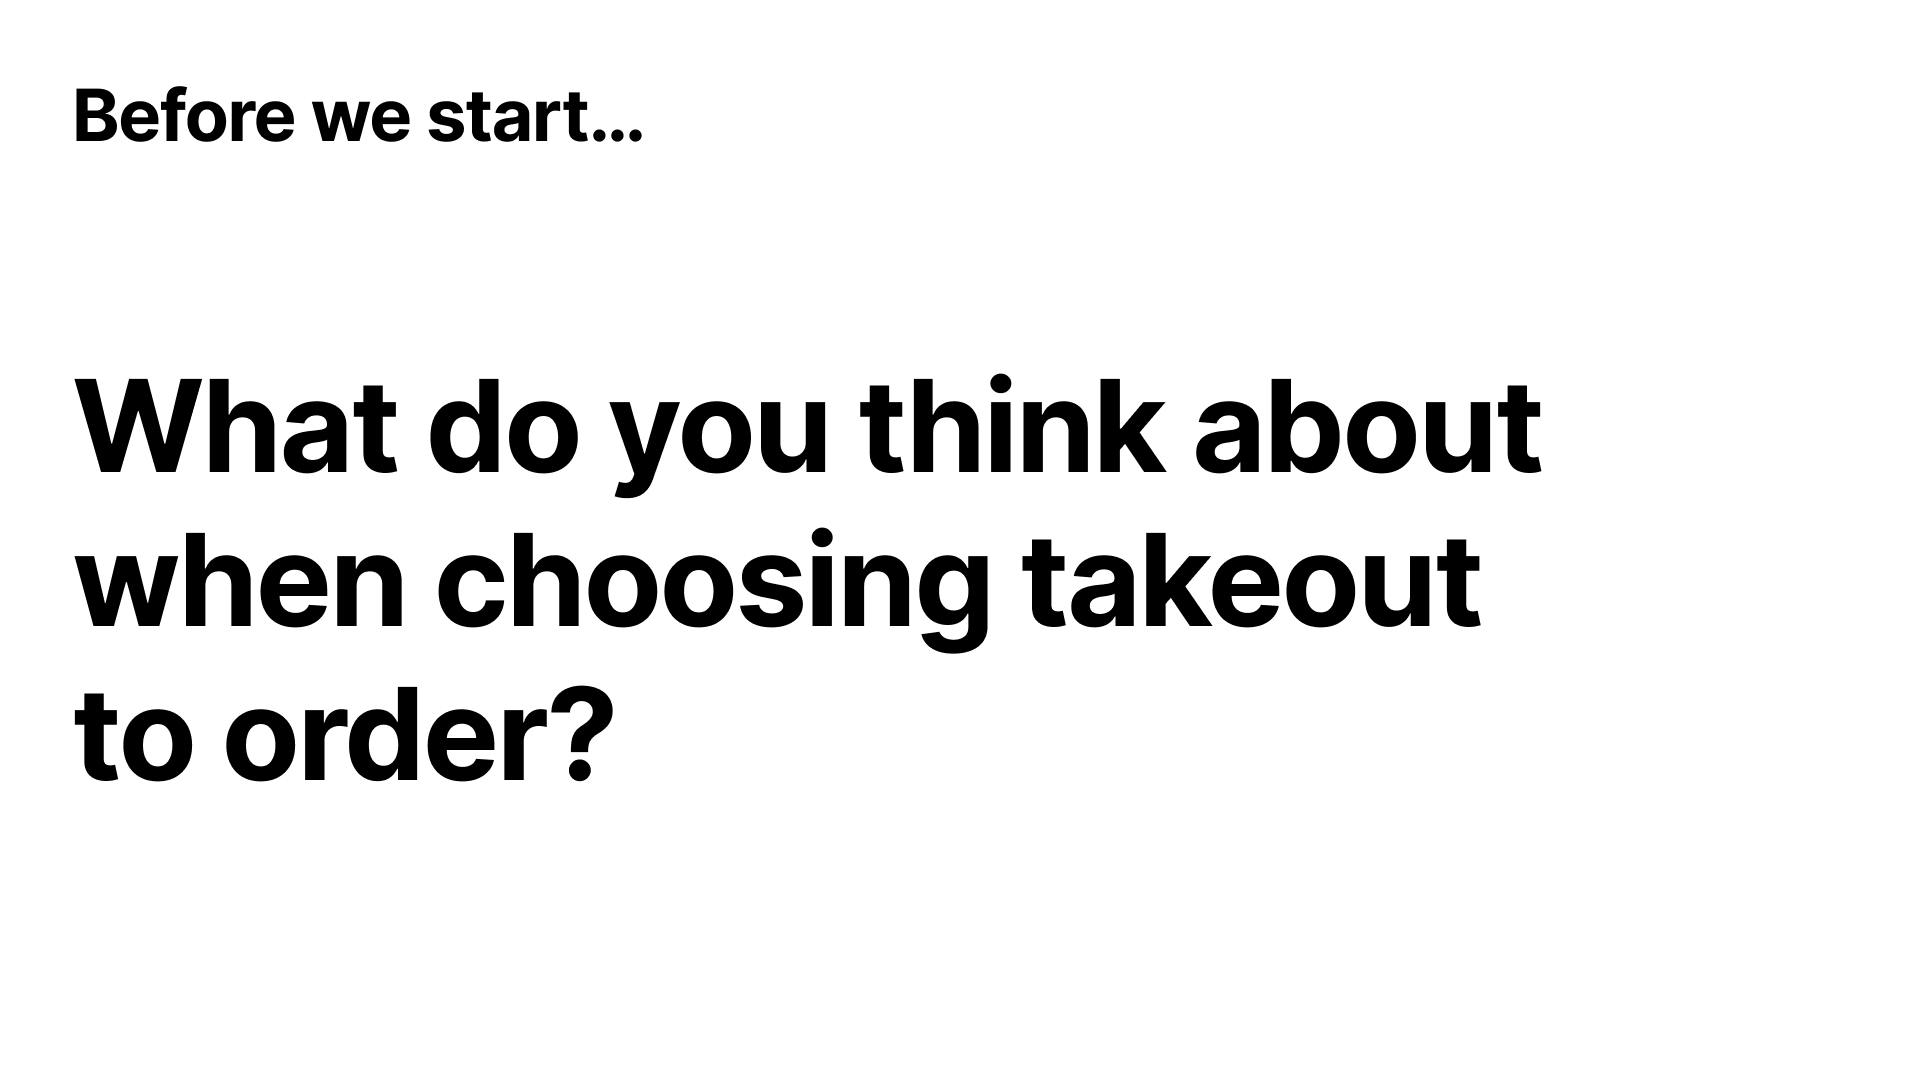 Slide asking "what do you think about when choosing takeout to order?"